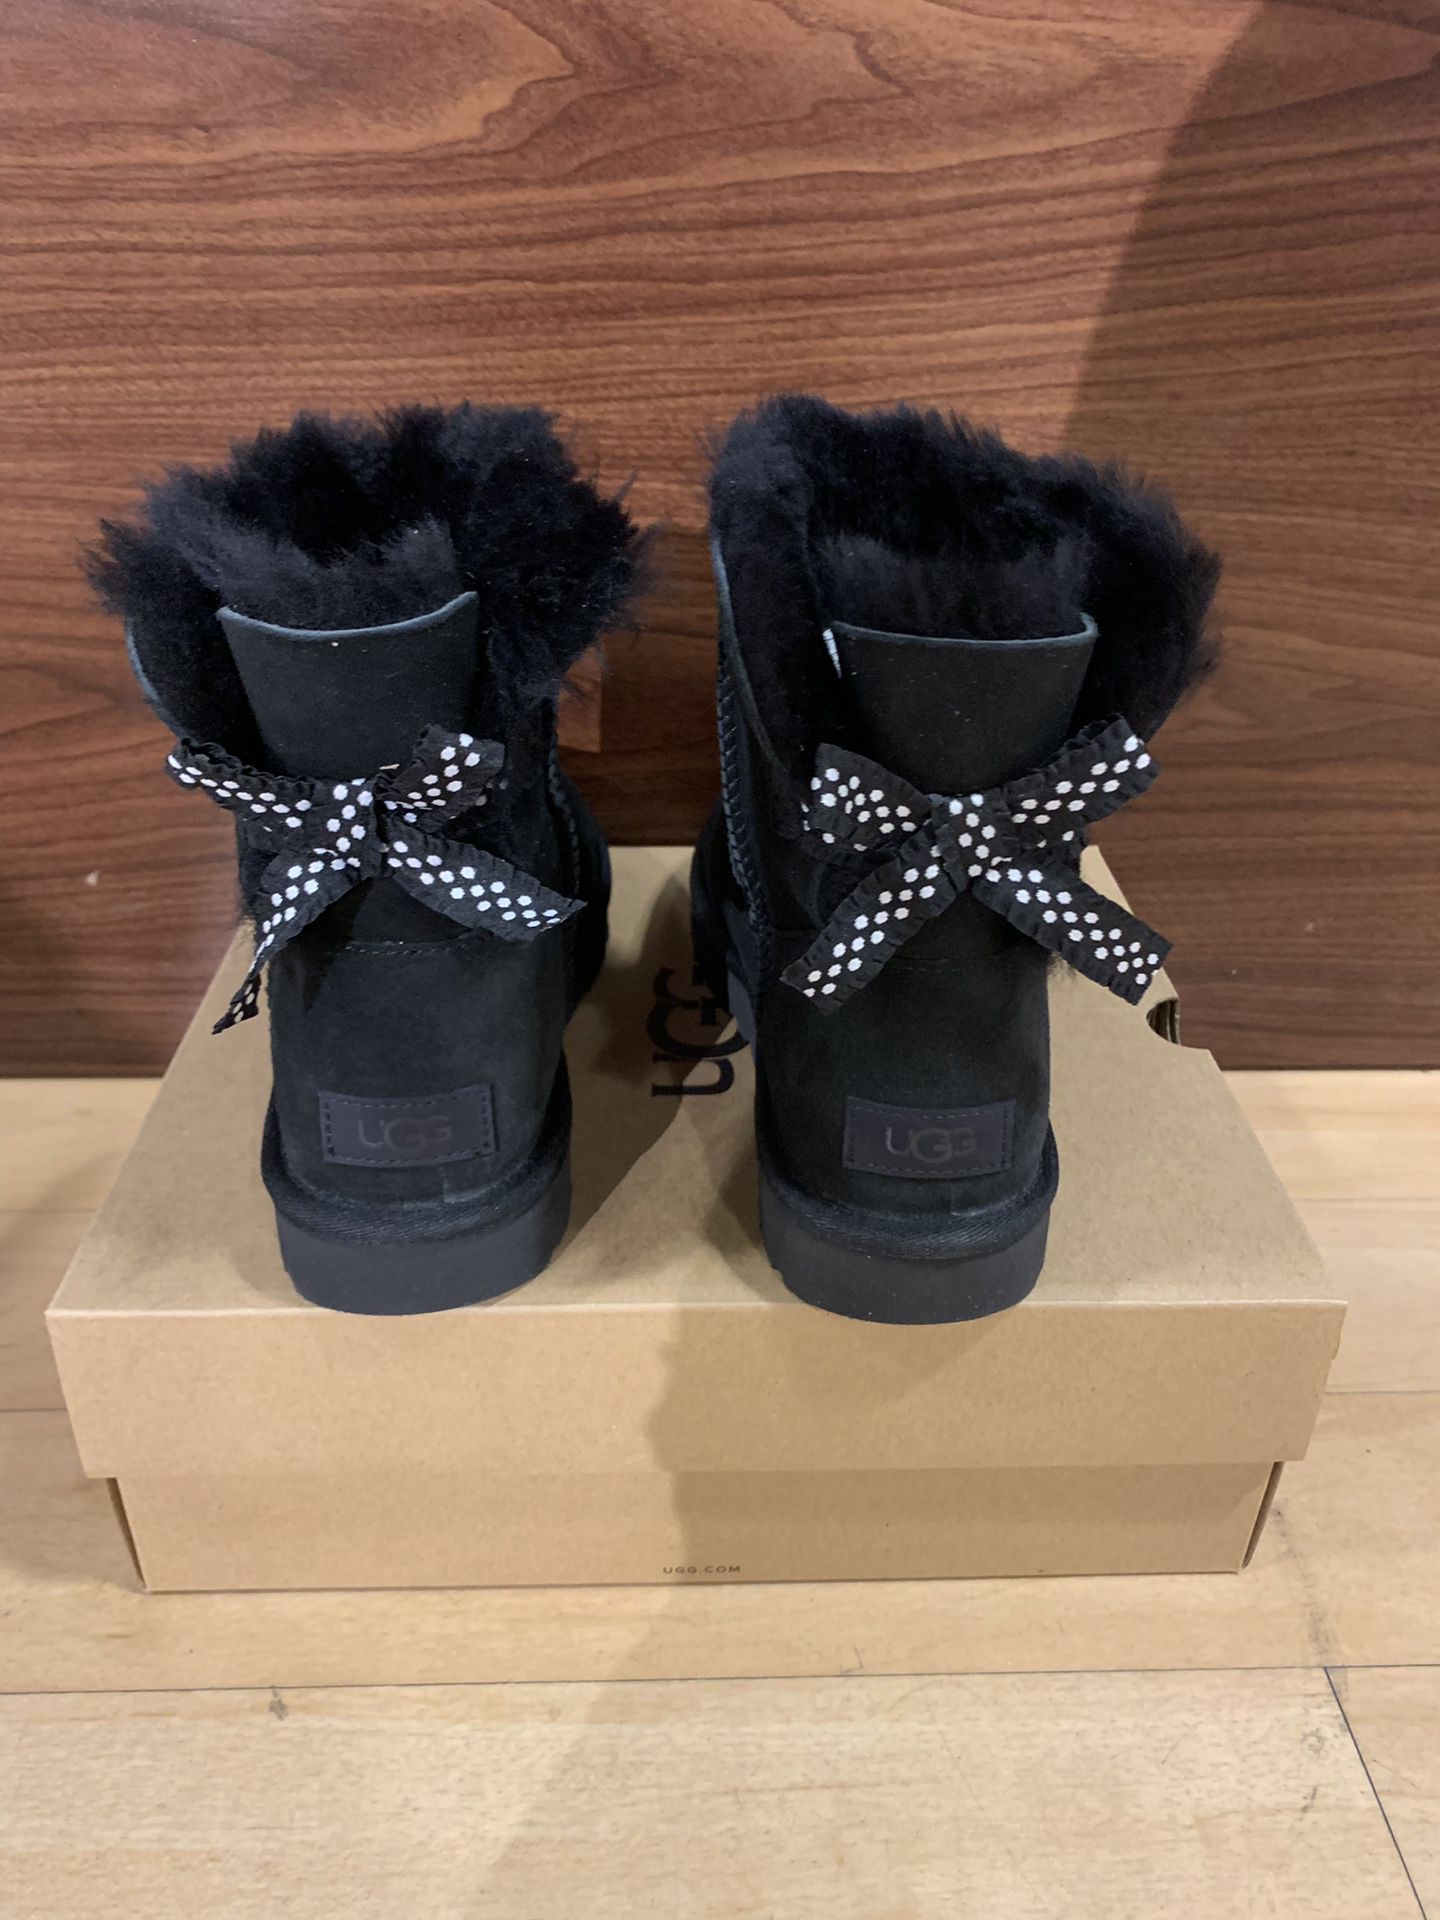 100% Authentic Brand New in Box UGG Mini Bailey Bow II Ruffled Boots / Women size 7 / Color: Black